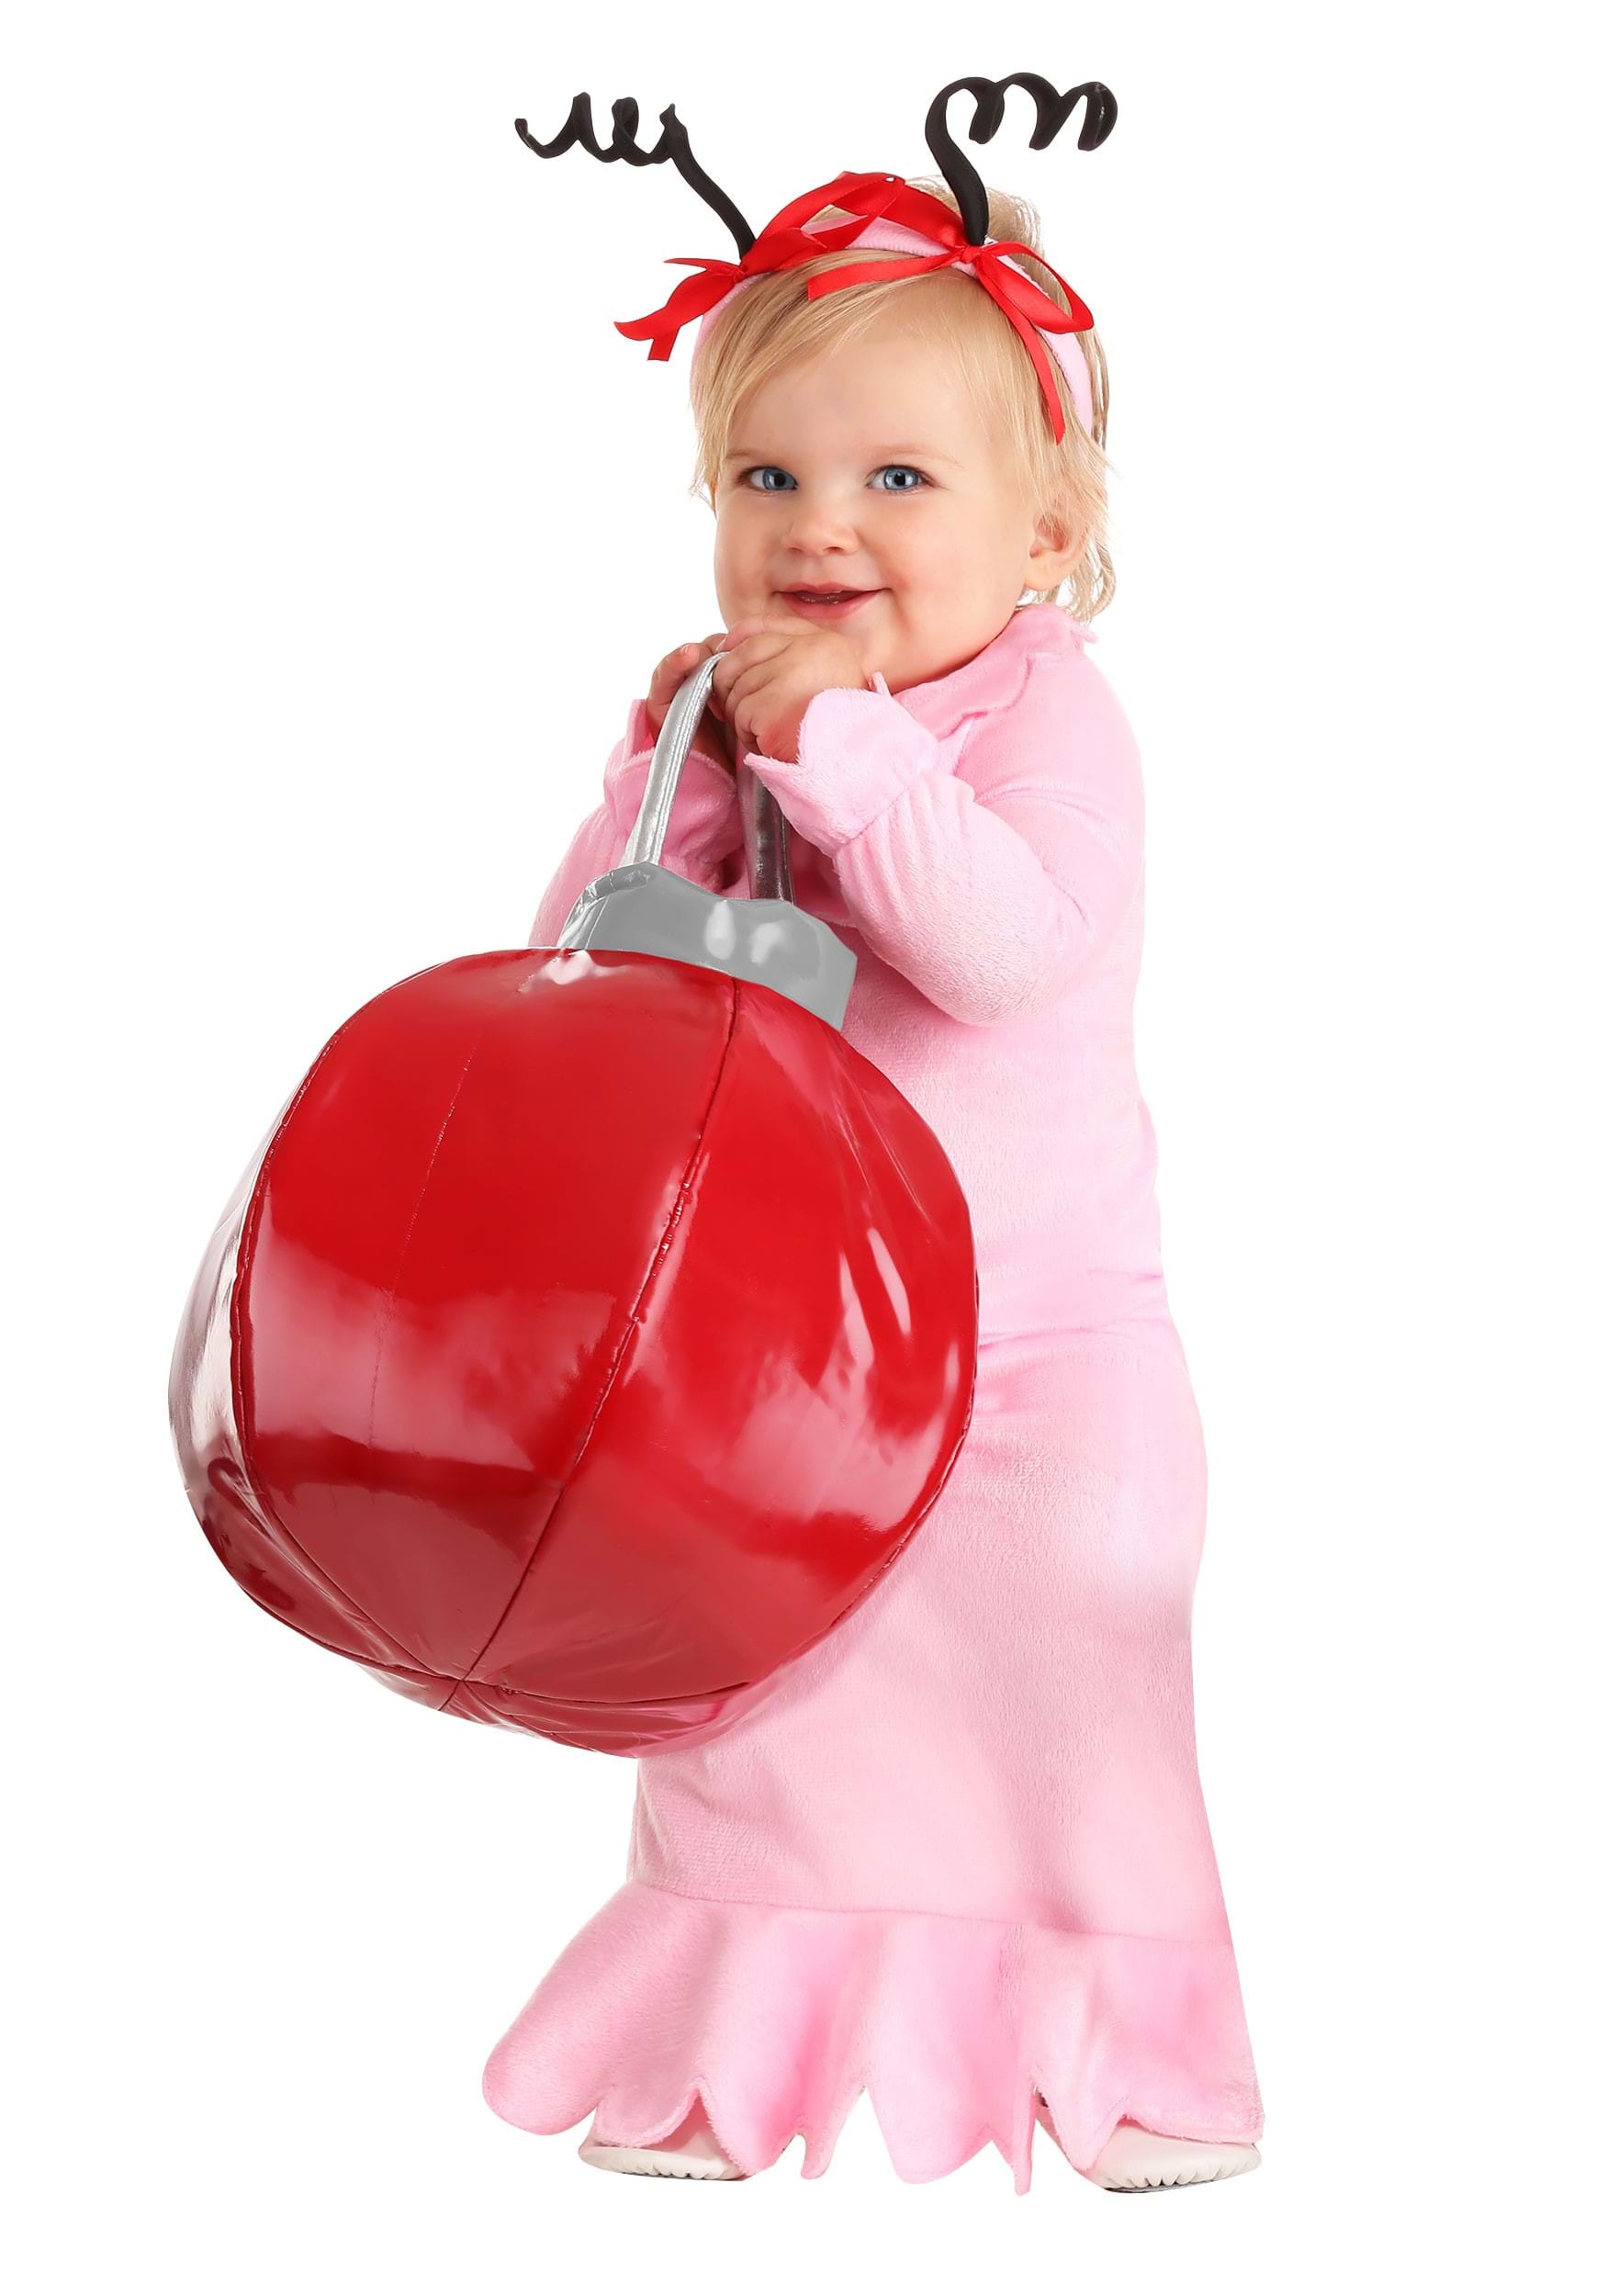 Dr. Seuss Classic Cindy Lou Who Infant Costume | How the Grinch Stole Christmas Costumes